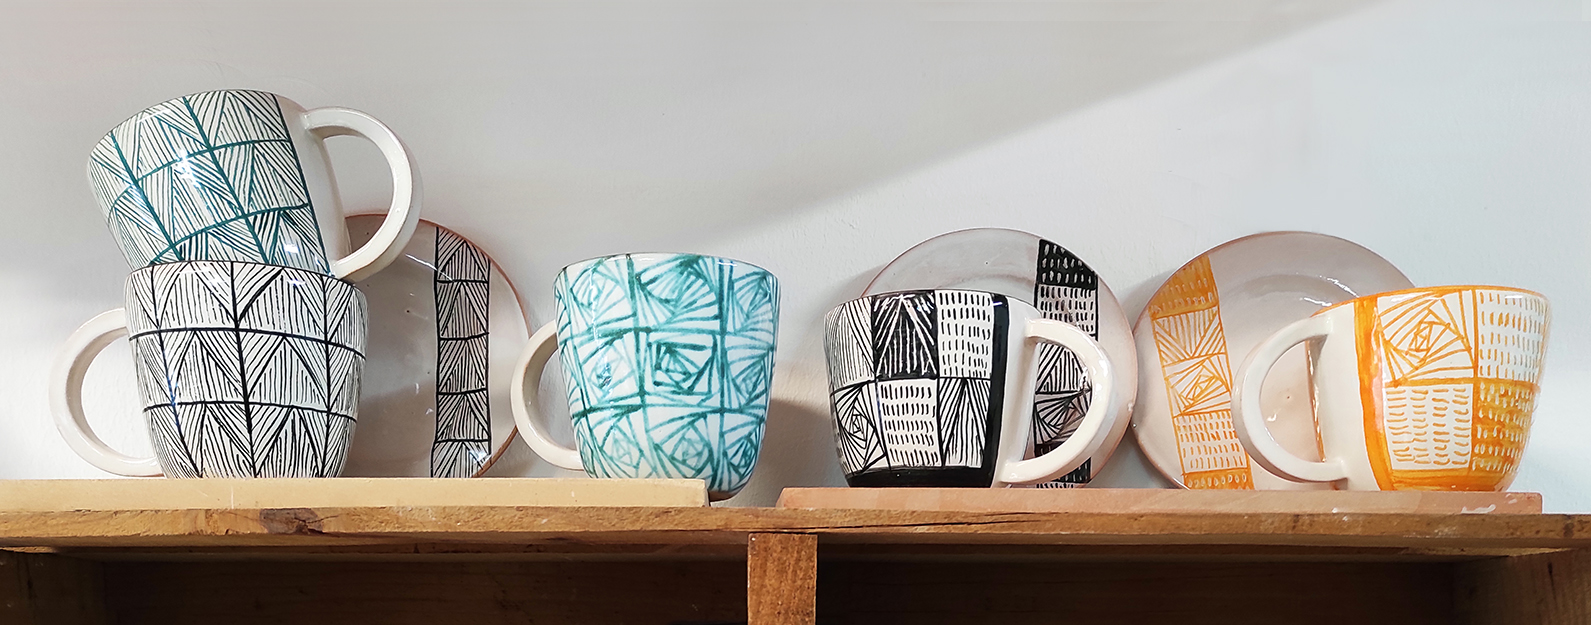 Decorate Your Own Mug